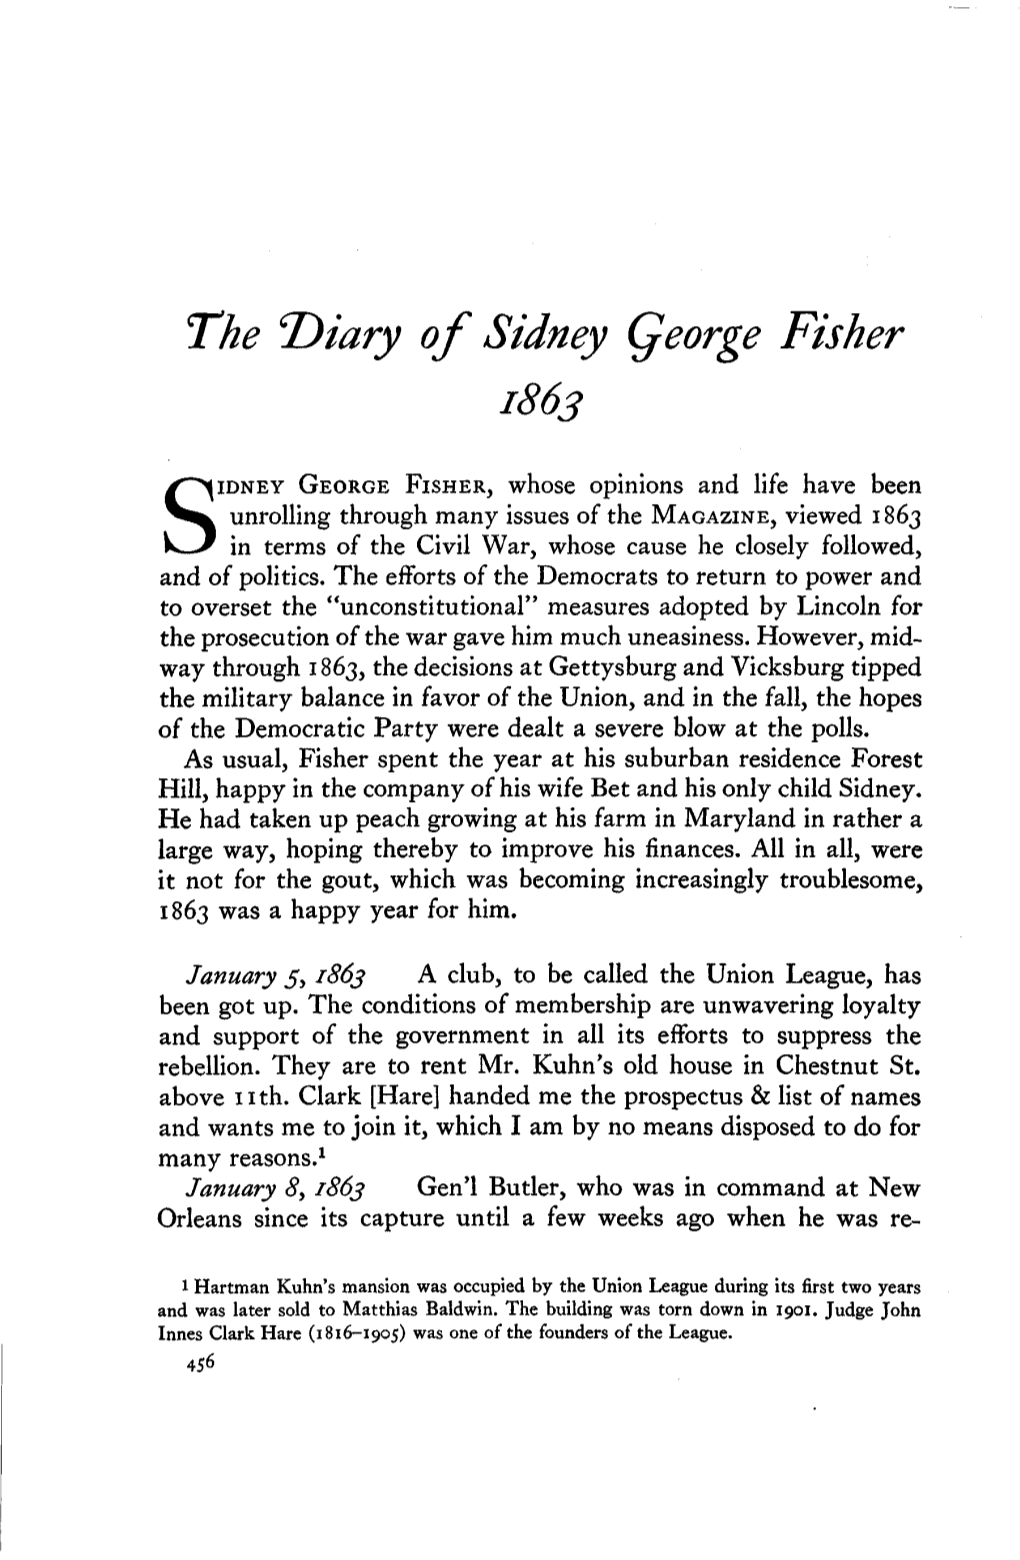 The T)Iary of Sidney Qeorge Fisher 1863